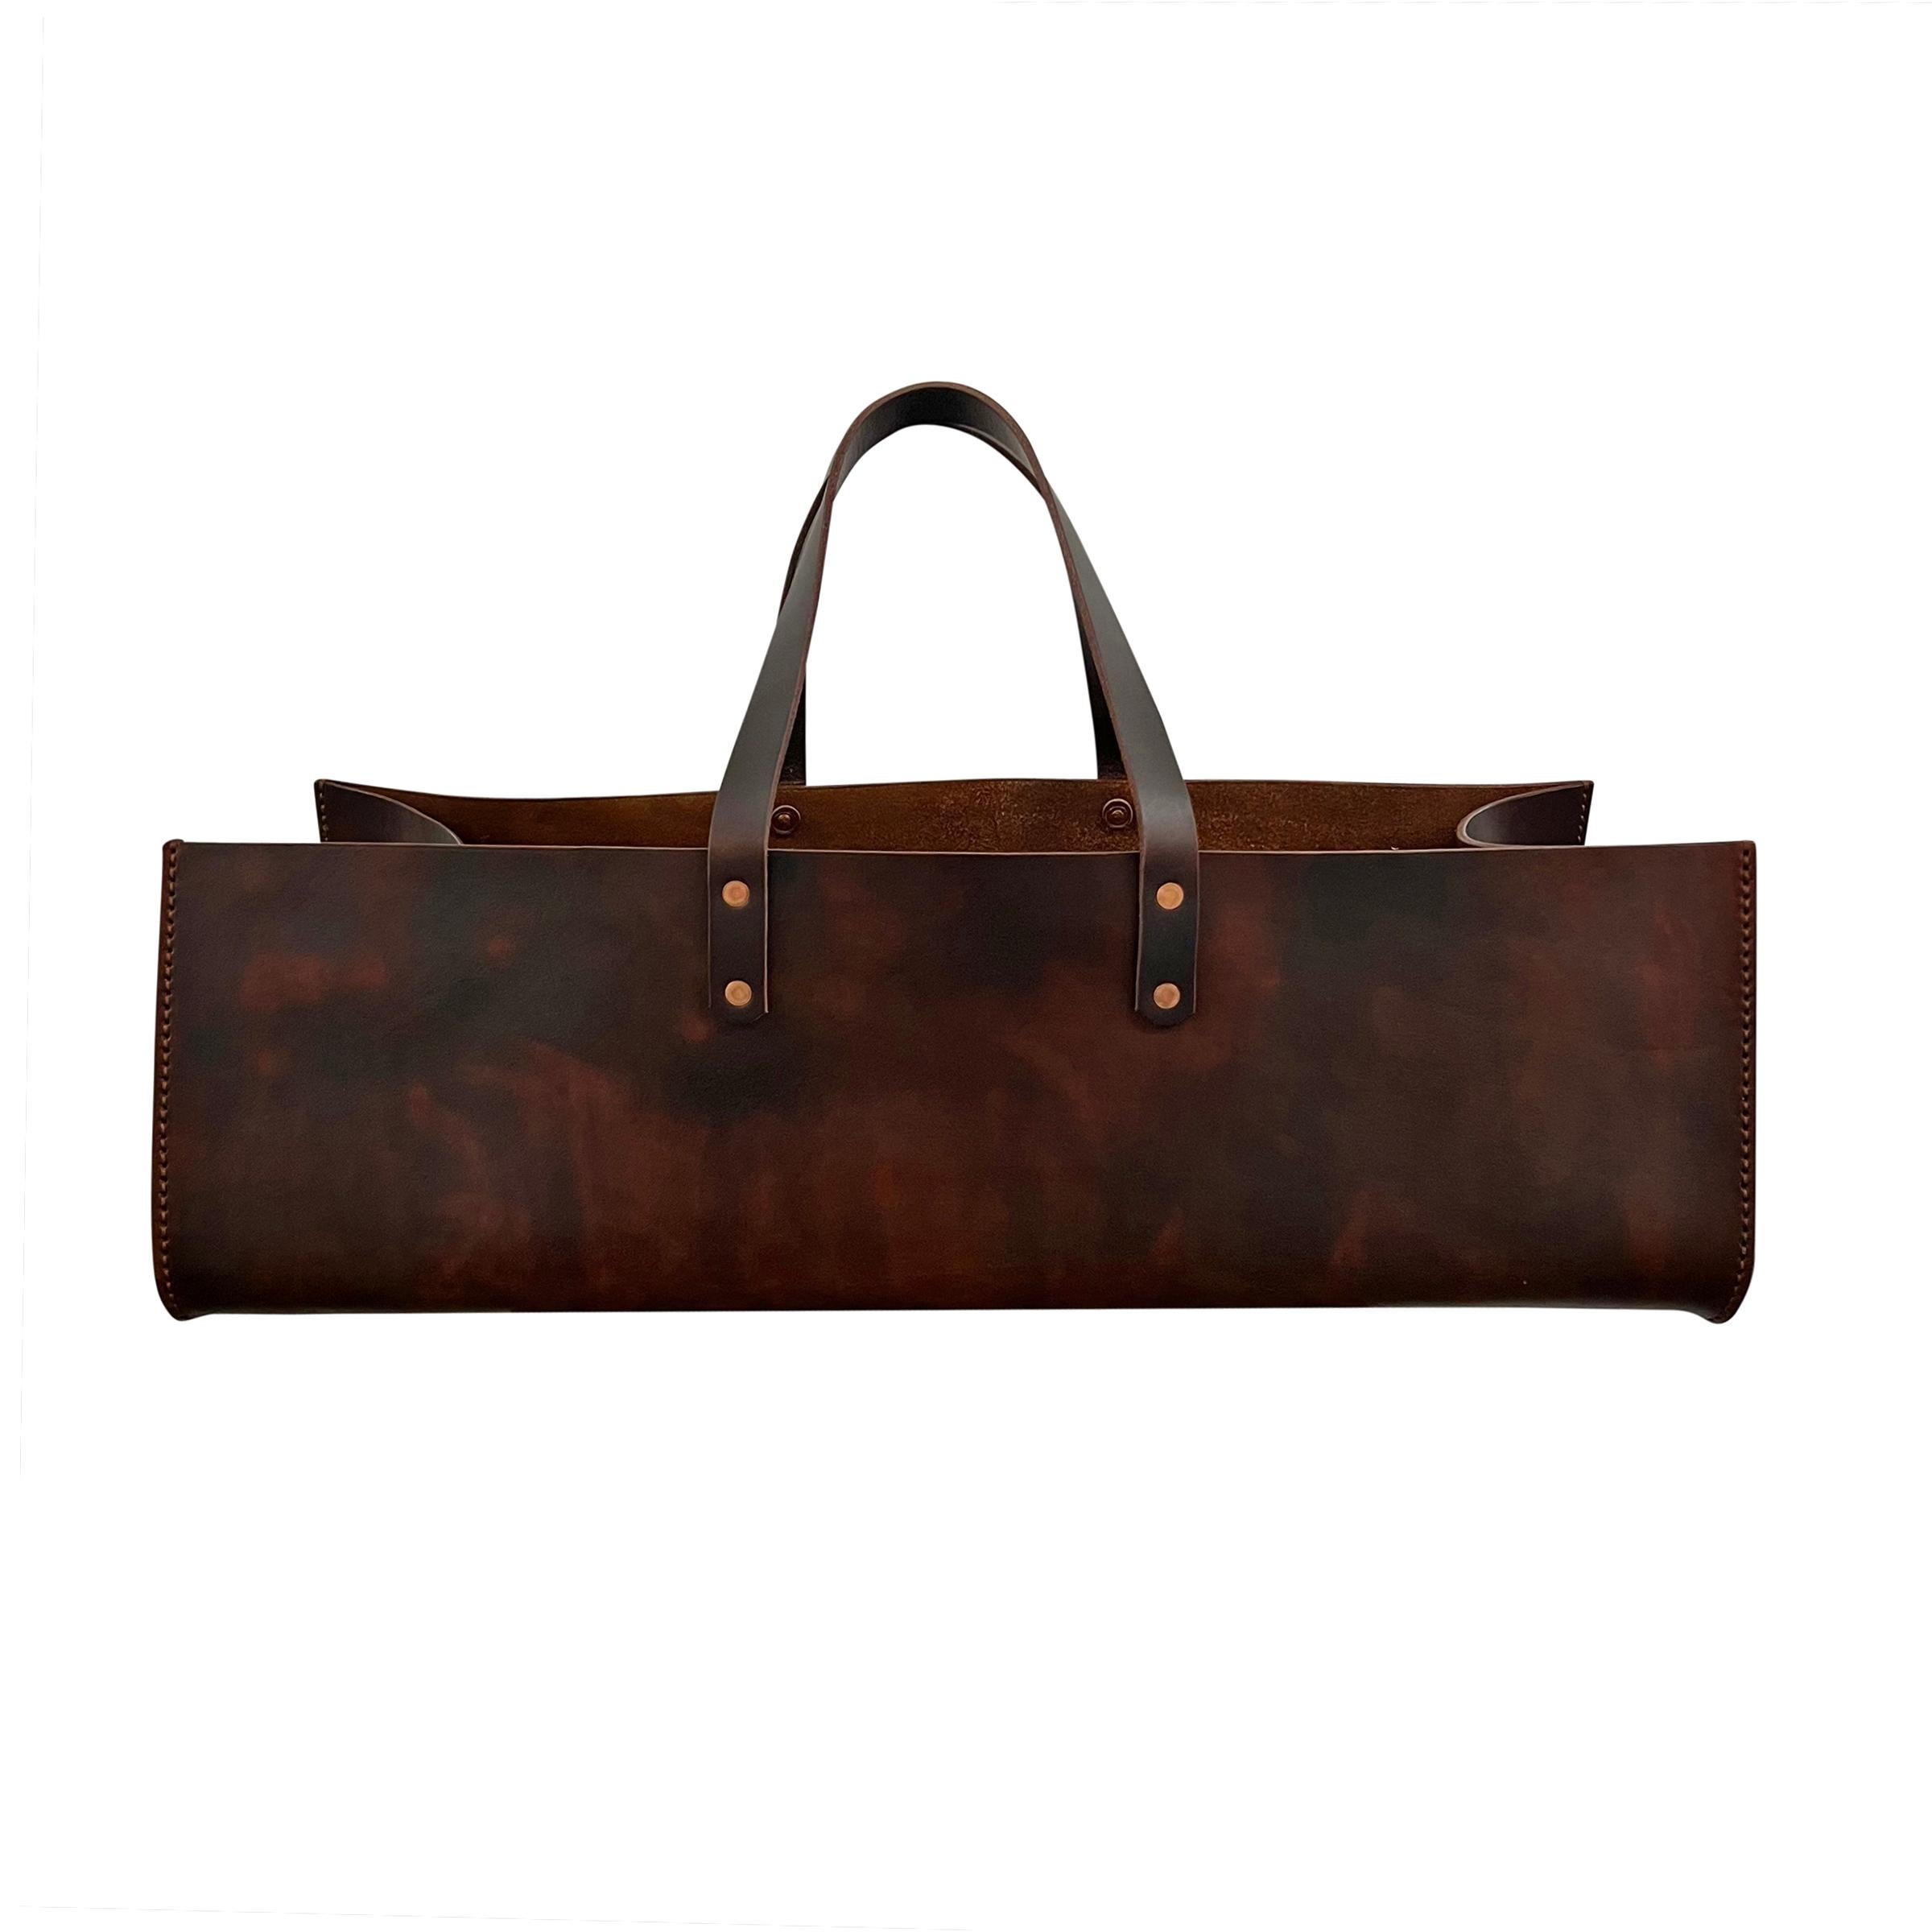 Elevate your gardening experience with this exquisite custom leather garden trug, designed by RIGHT PROPER, and meticulously crafted by a skilled artisan in England. Crafted from hand-dyed belting leather and secured with hand-hammered copper